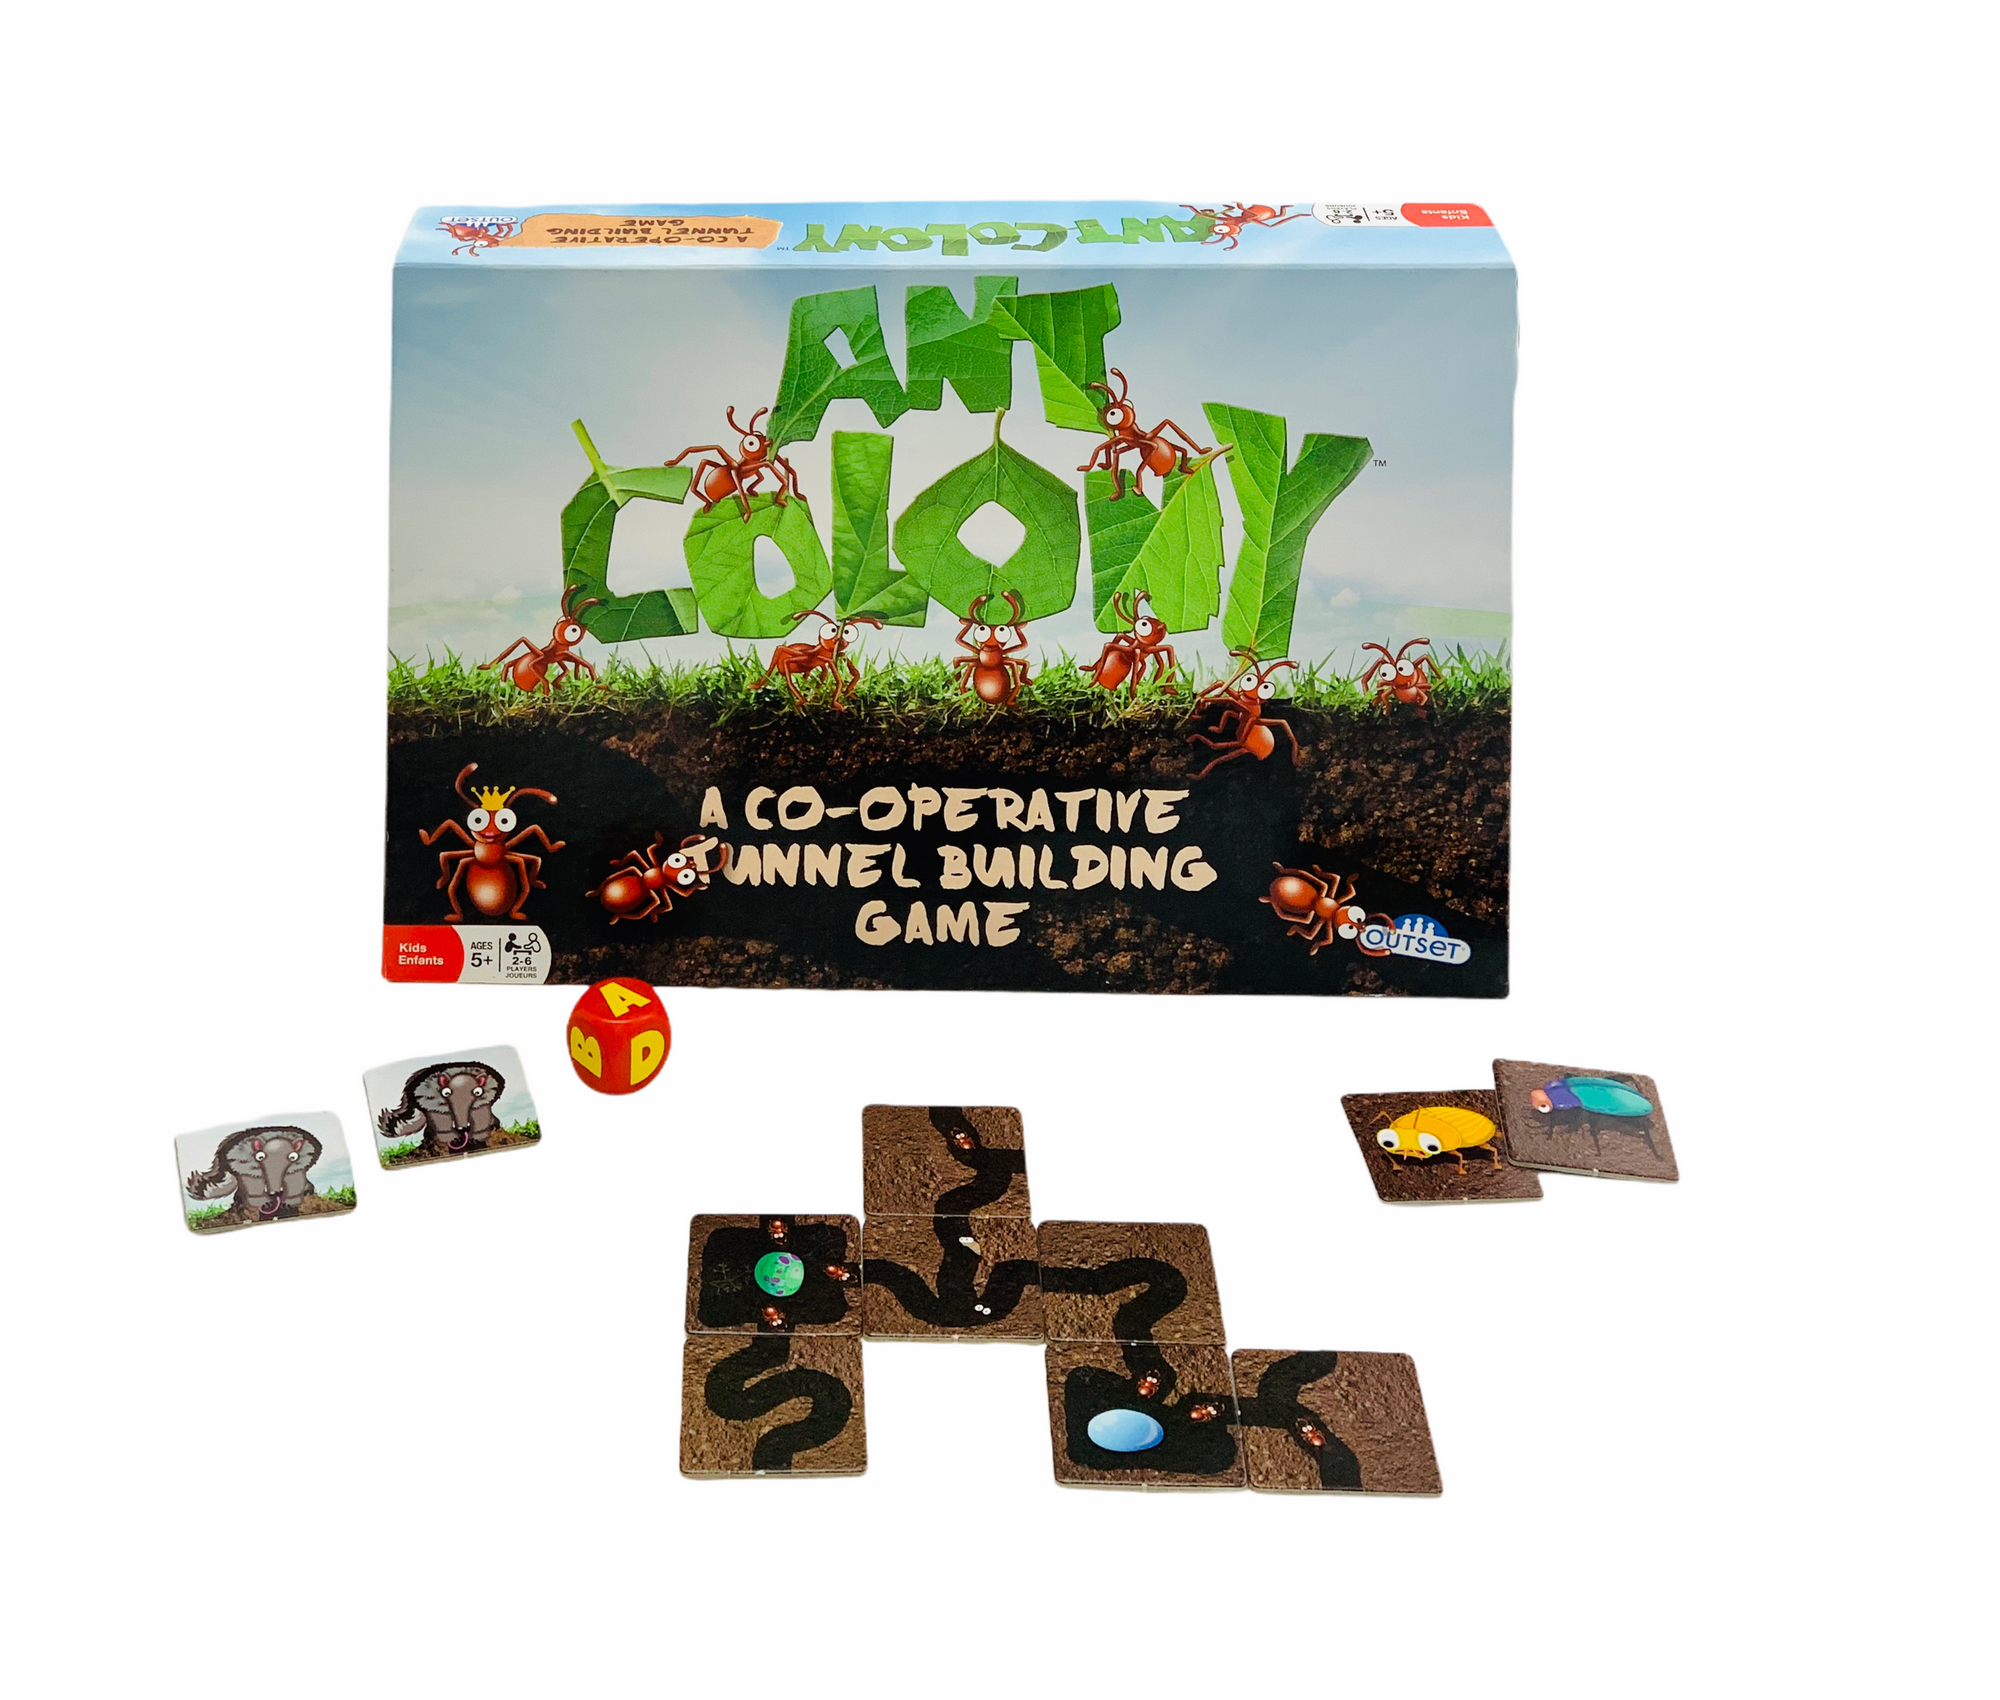 Ant Colony cooperative game with game tiles and dice laid out in front of the box on a white background